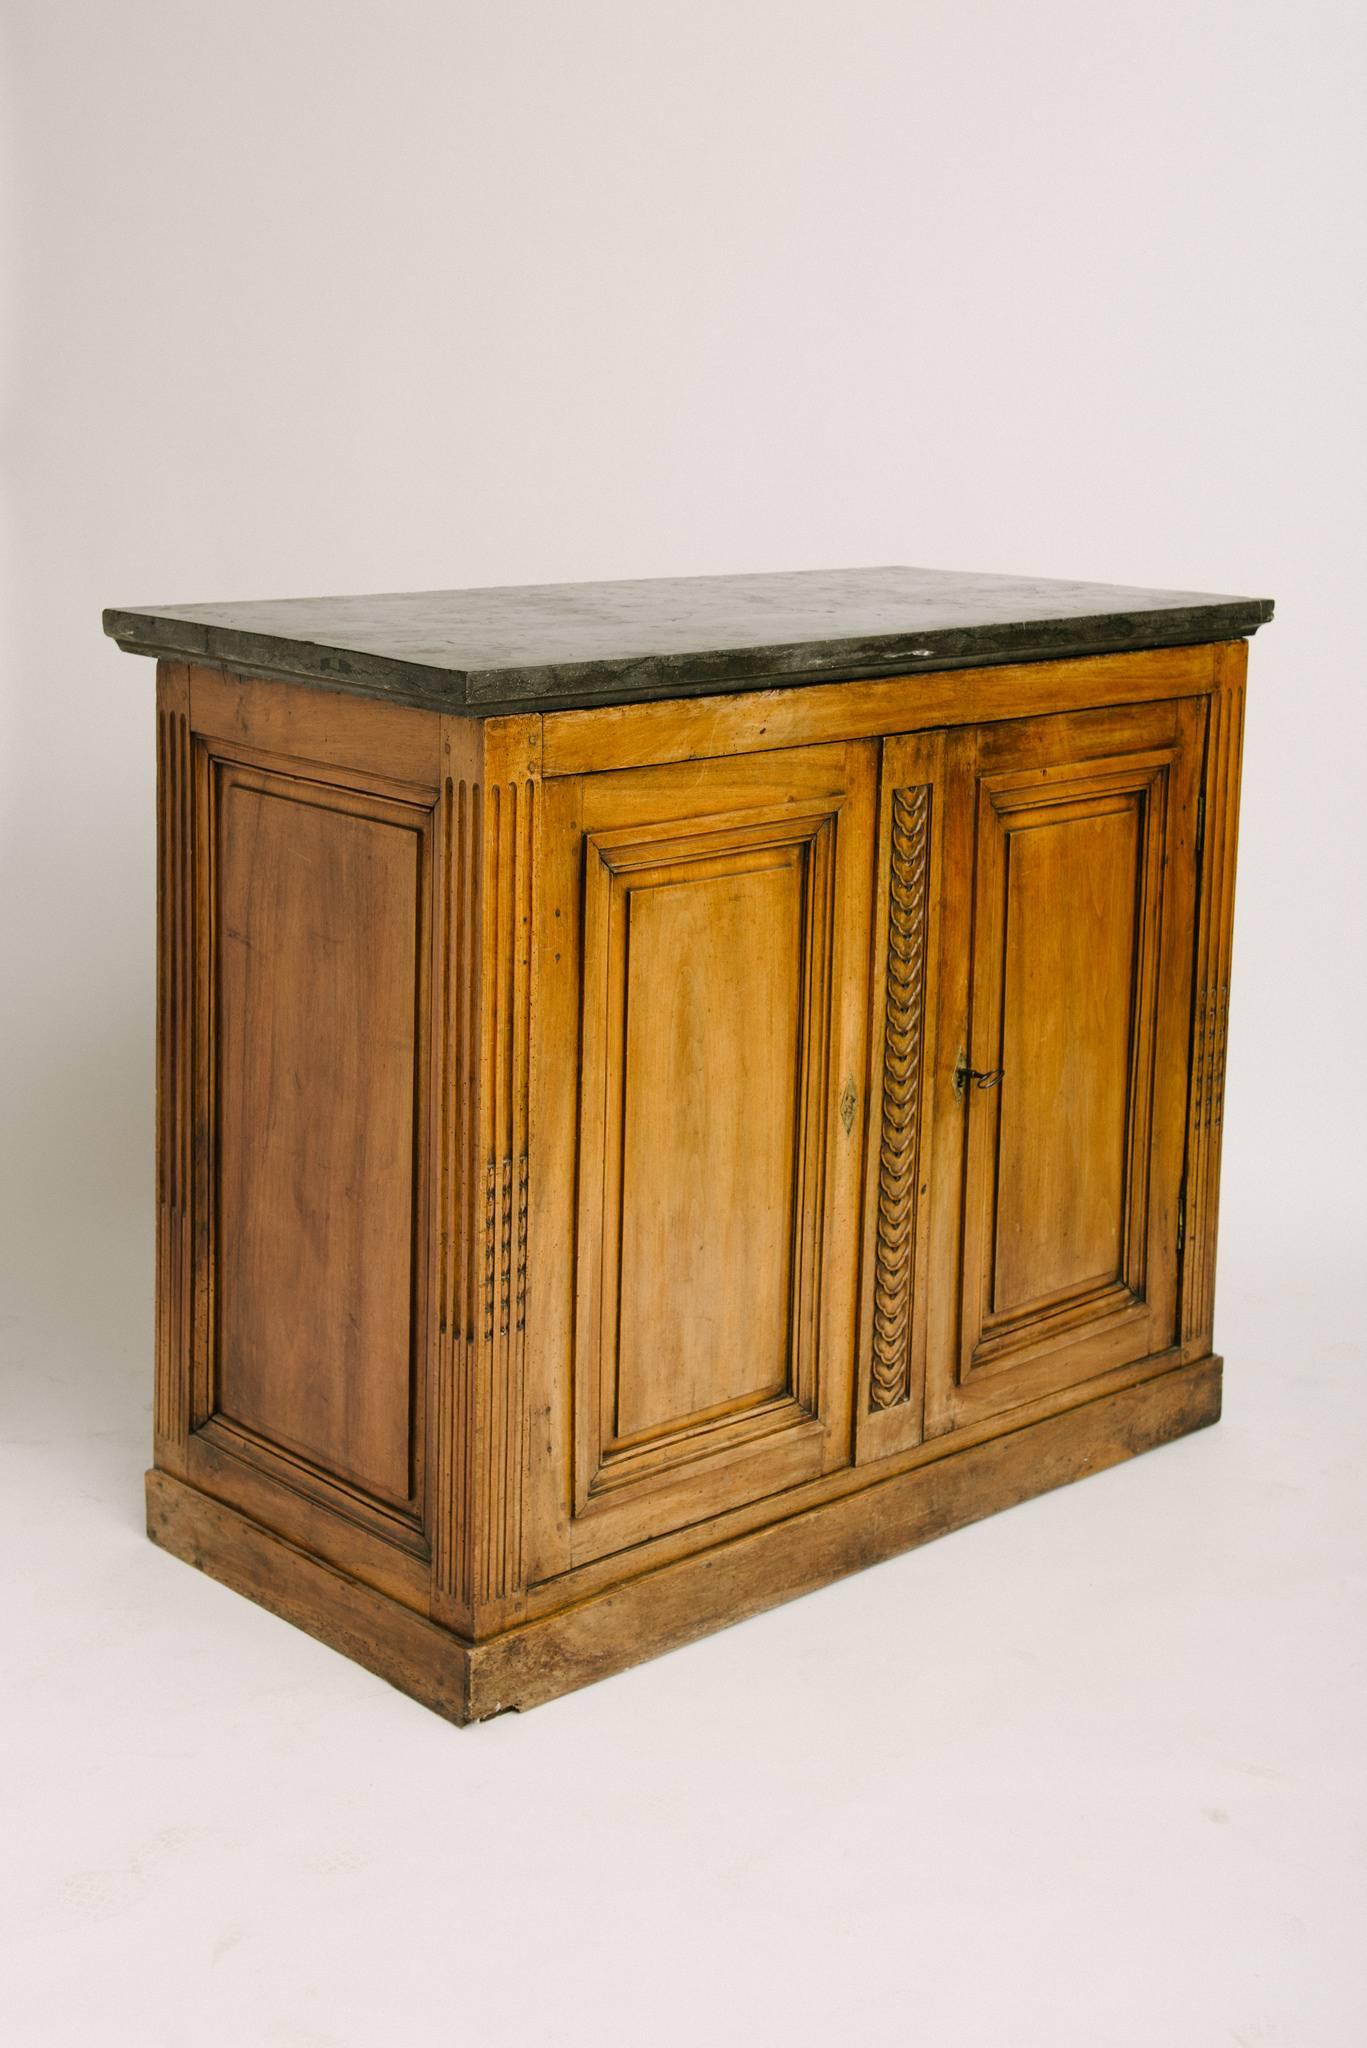 18th century French Louis XVI carved walnut buffet with original marble top.